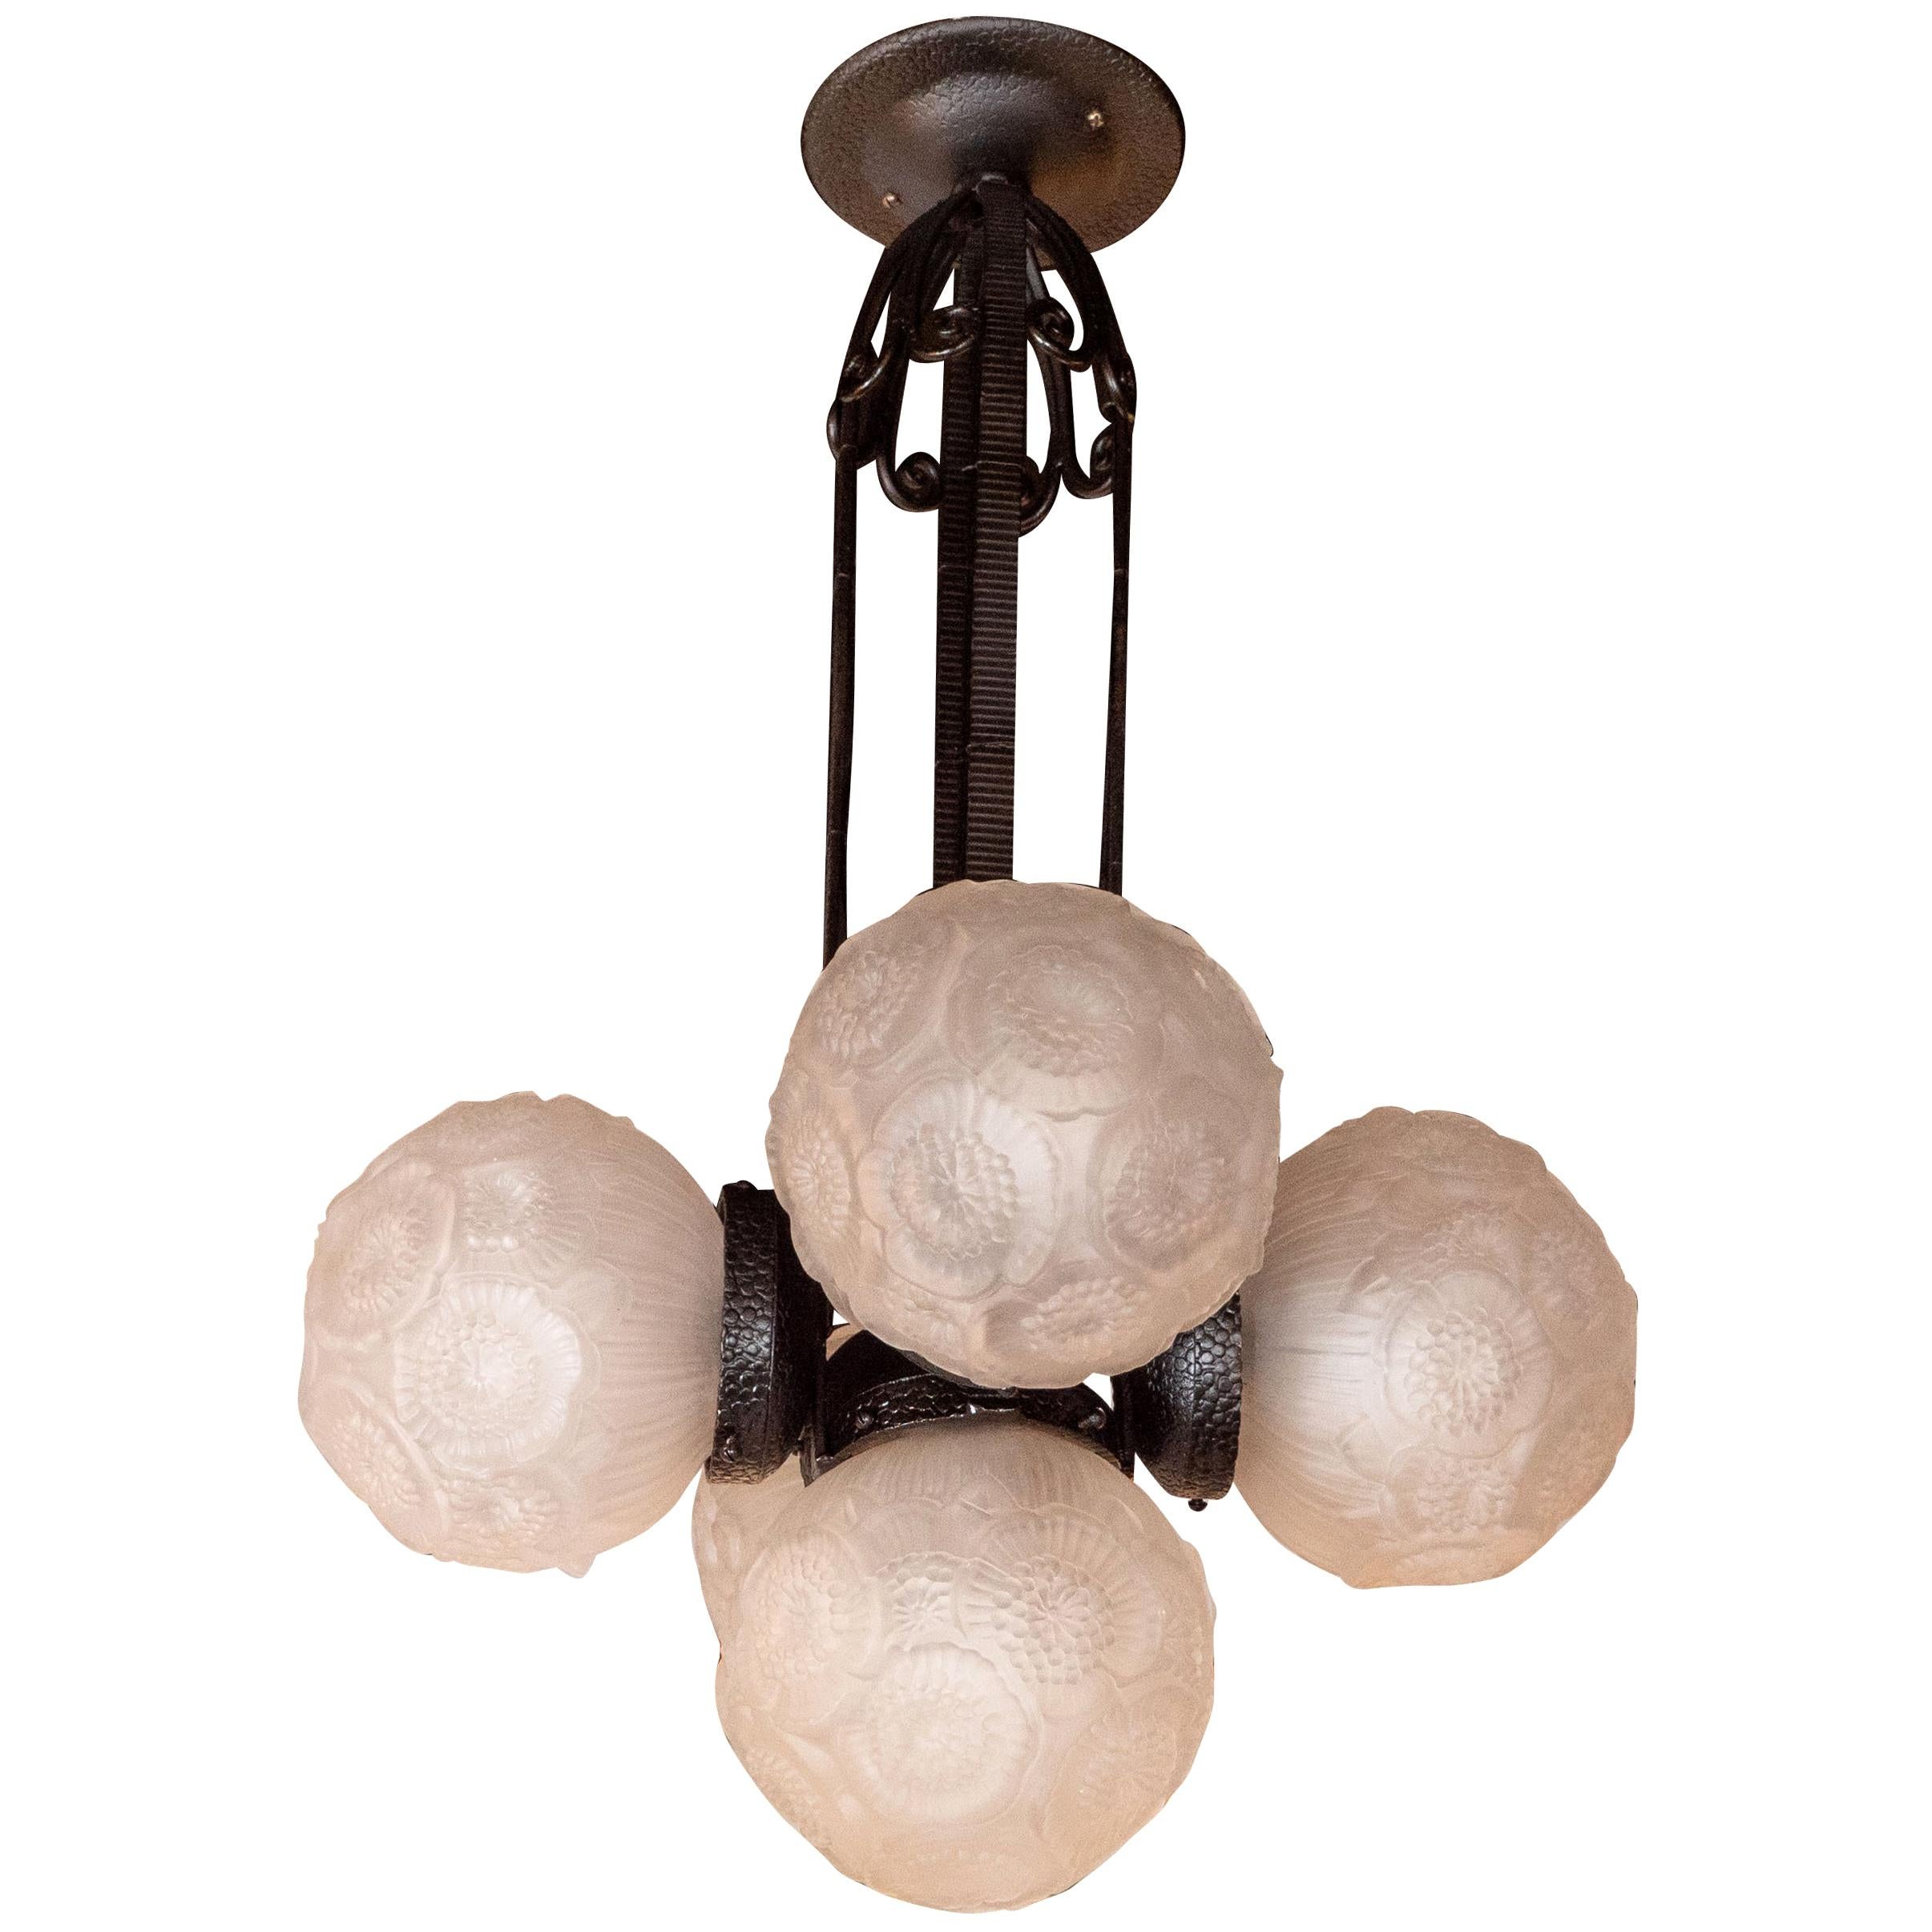 Art Deco Five Globe Chandelier in Wrought Iron & Frosted Glass by Muller Frères